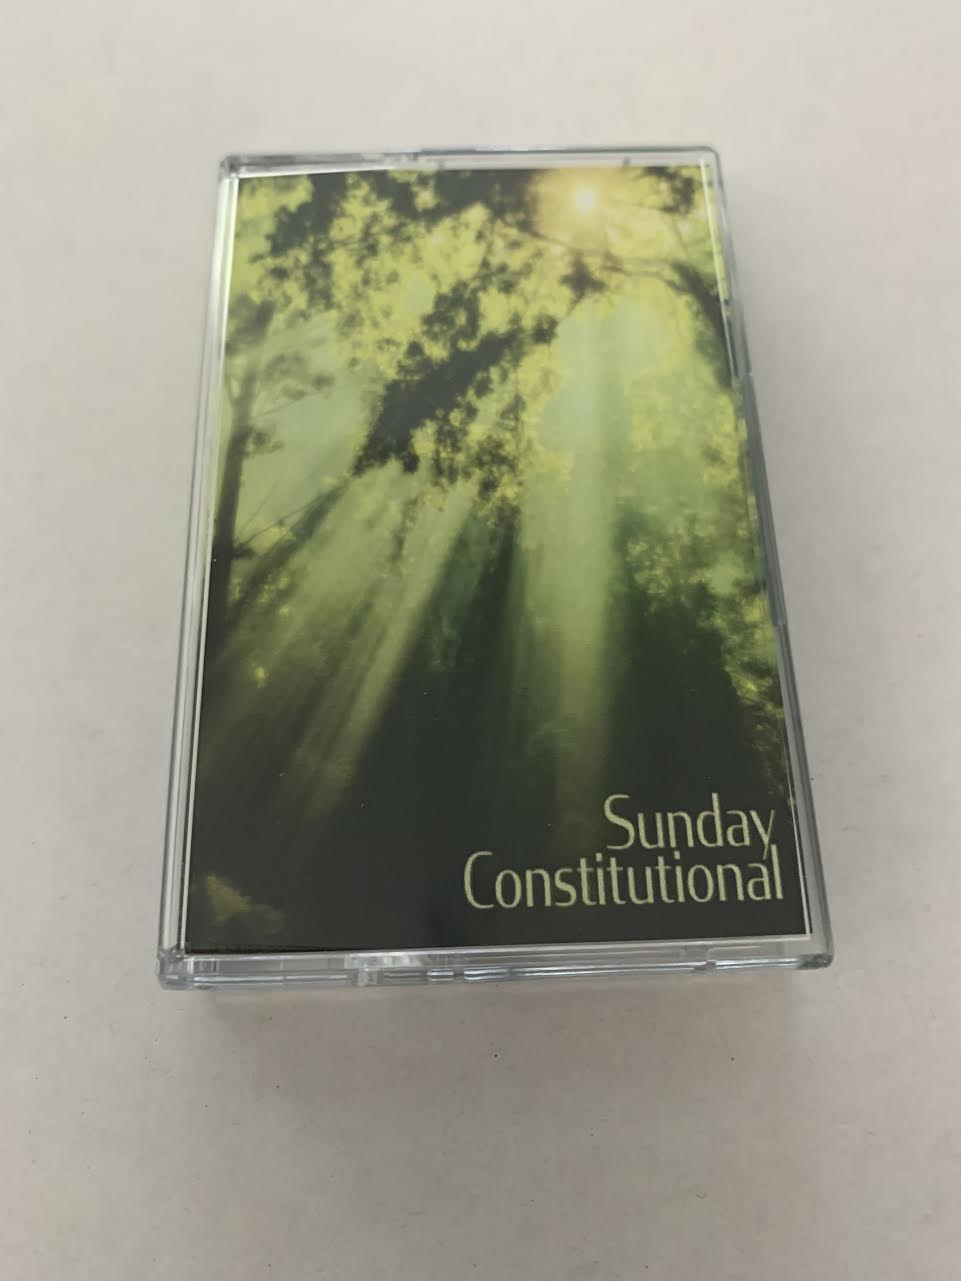 Andrulian - Sunday Constitutional [Downtempo] (Mystic Timbre - Tape - 7/14/20)